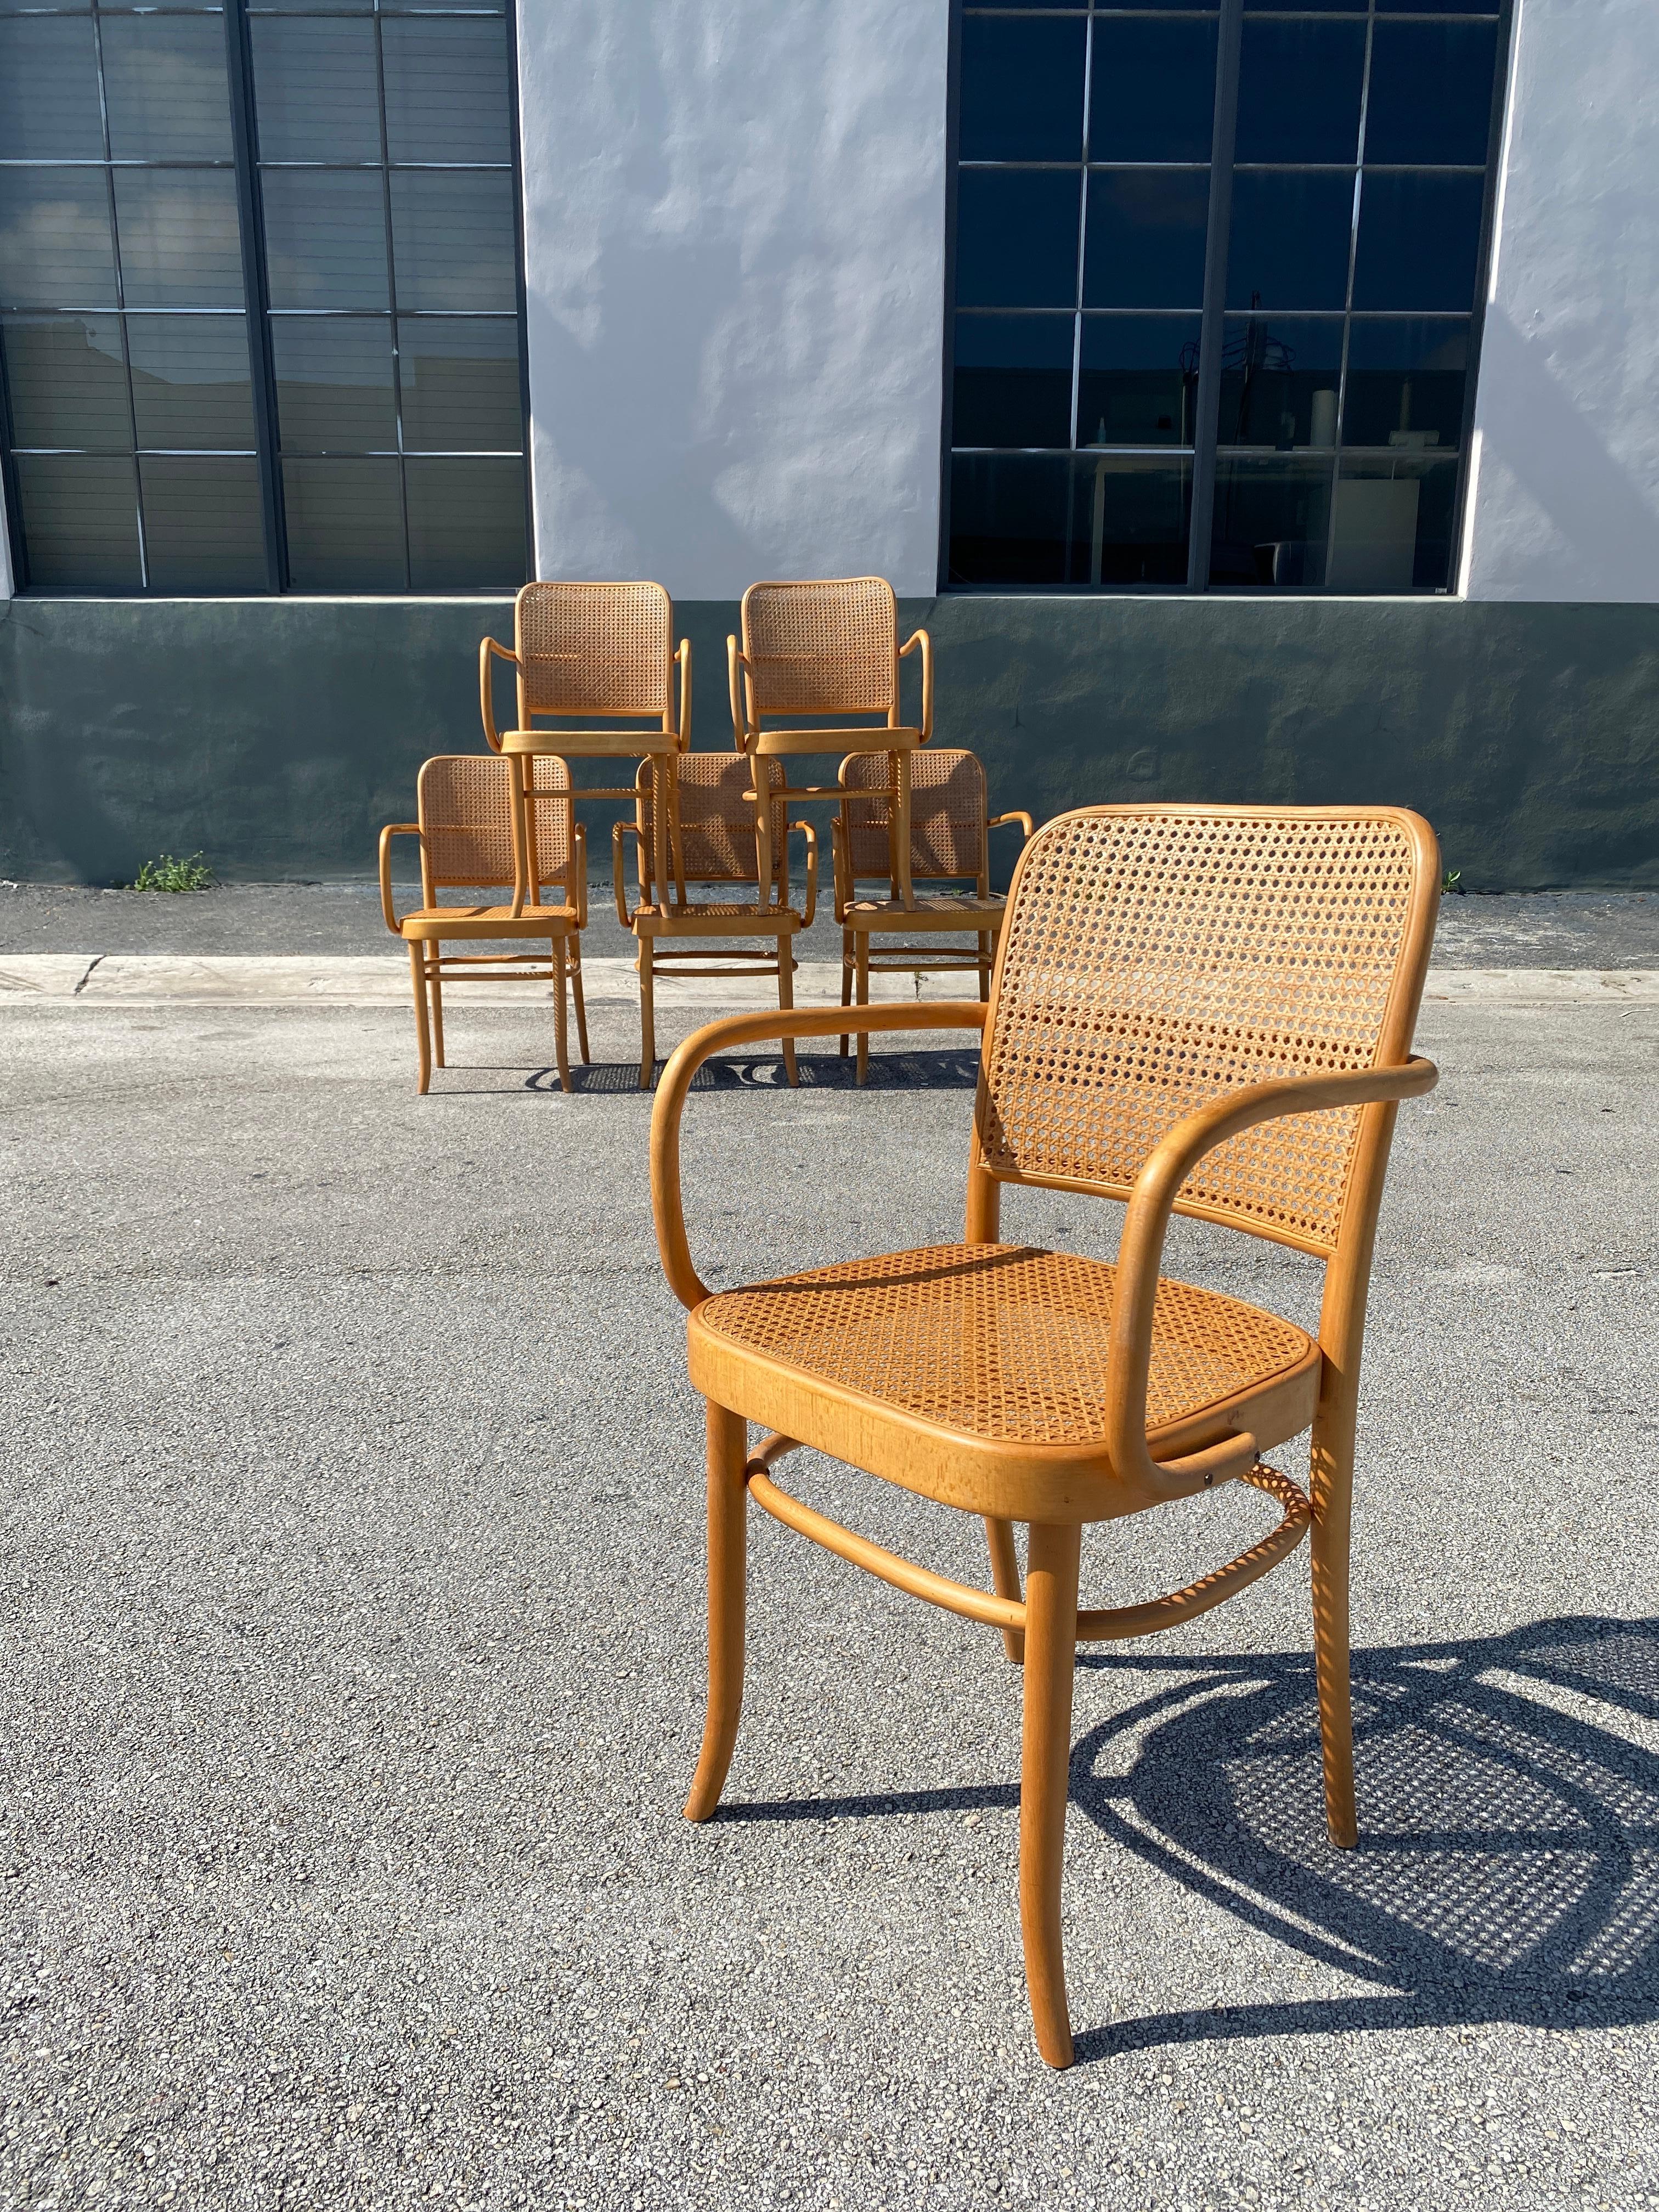 Mid-Century bentwood beech armchairs designed by Austrian architects Josef Frank and Josef Hoffman for Thonet. Each chair stamped made in Yugoslavia, feature cane inset seat and backs. Designed in the 1920s, these ‘Prague’ chairs model 811 have an